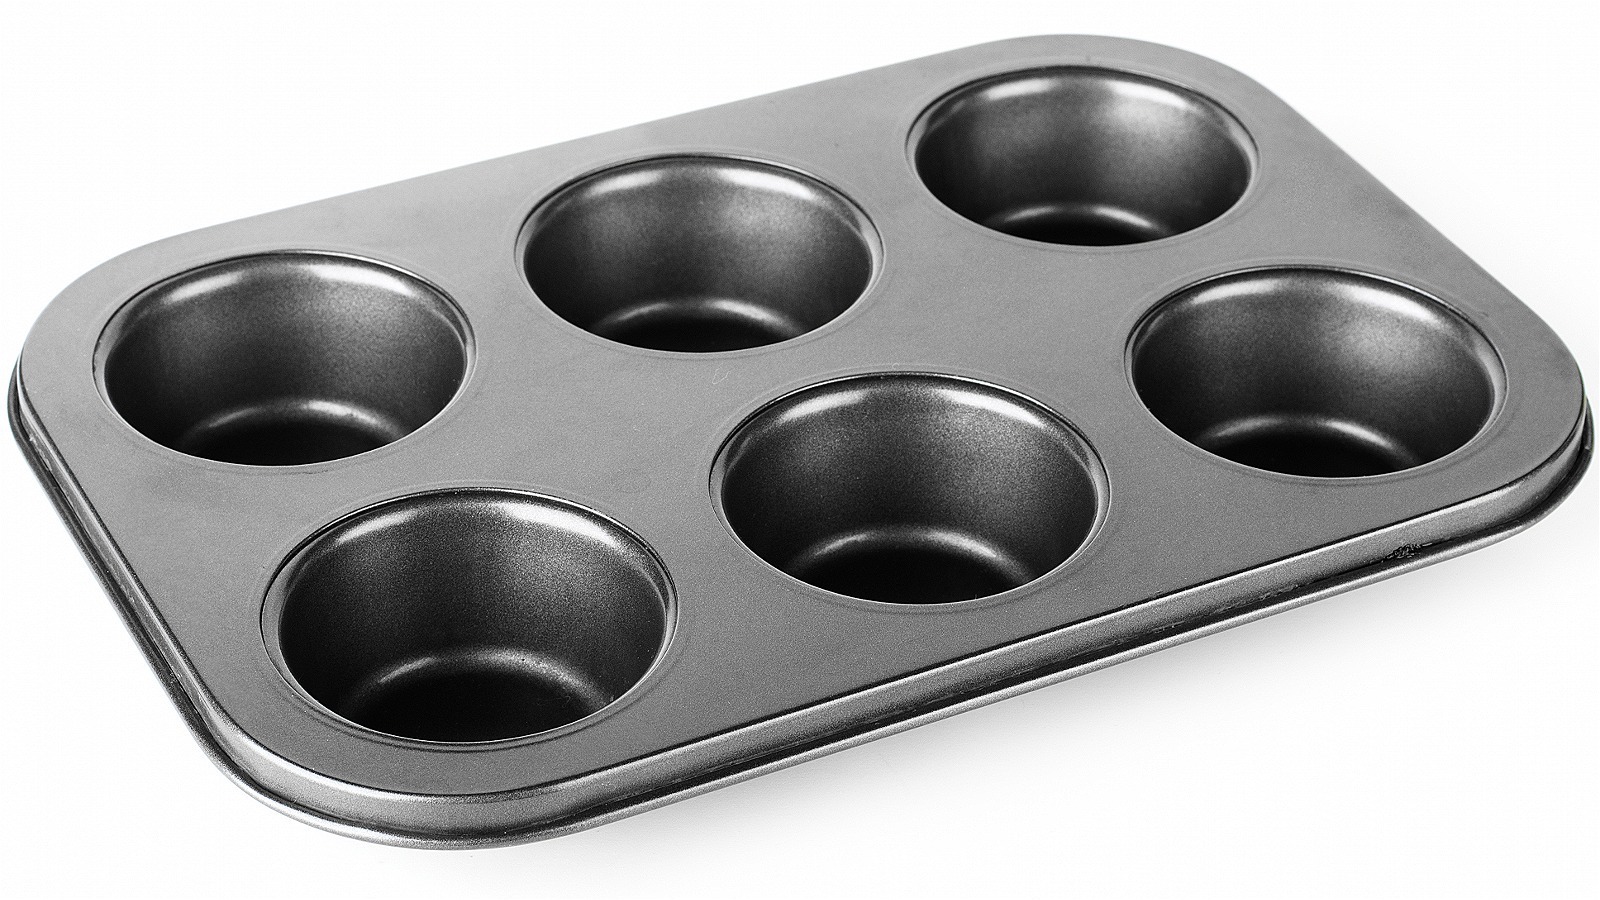 https://www.mashed.com/img/gallery/the-muffin-tin-trick-for-stunningly-round-cookies/l-intro-1676924501.jpg